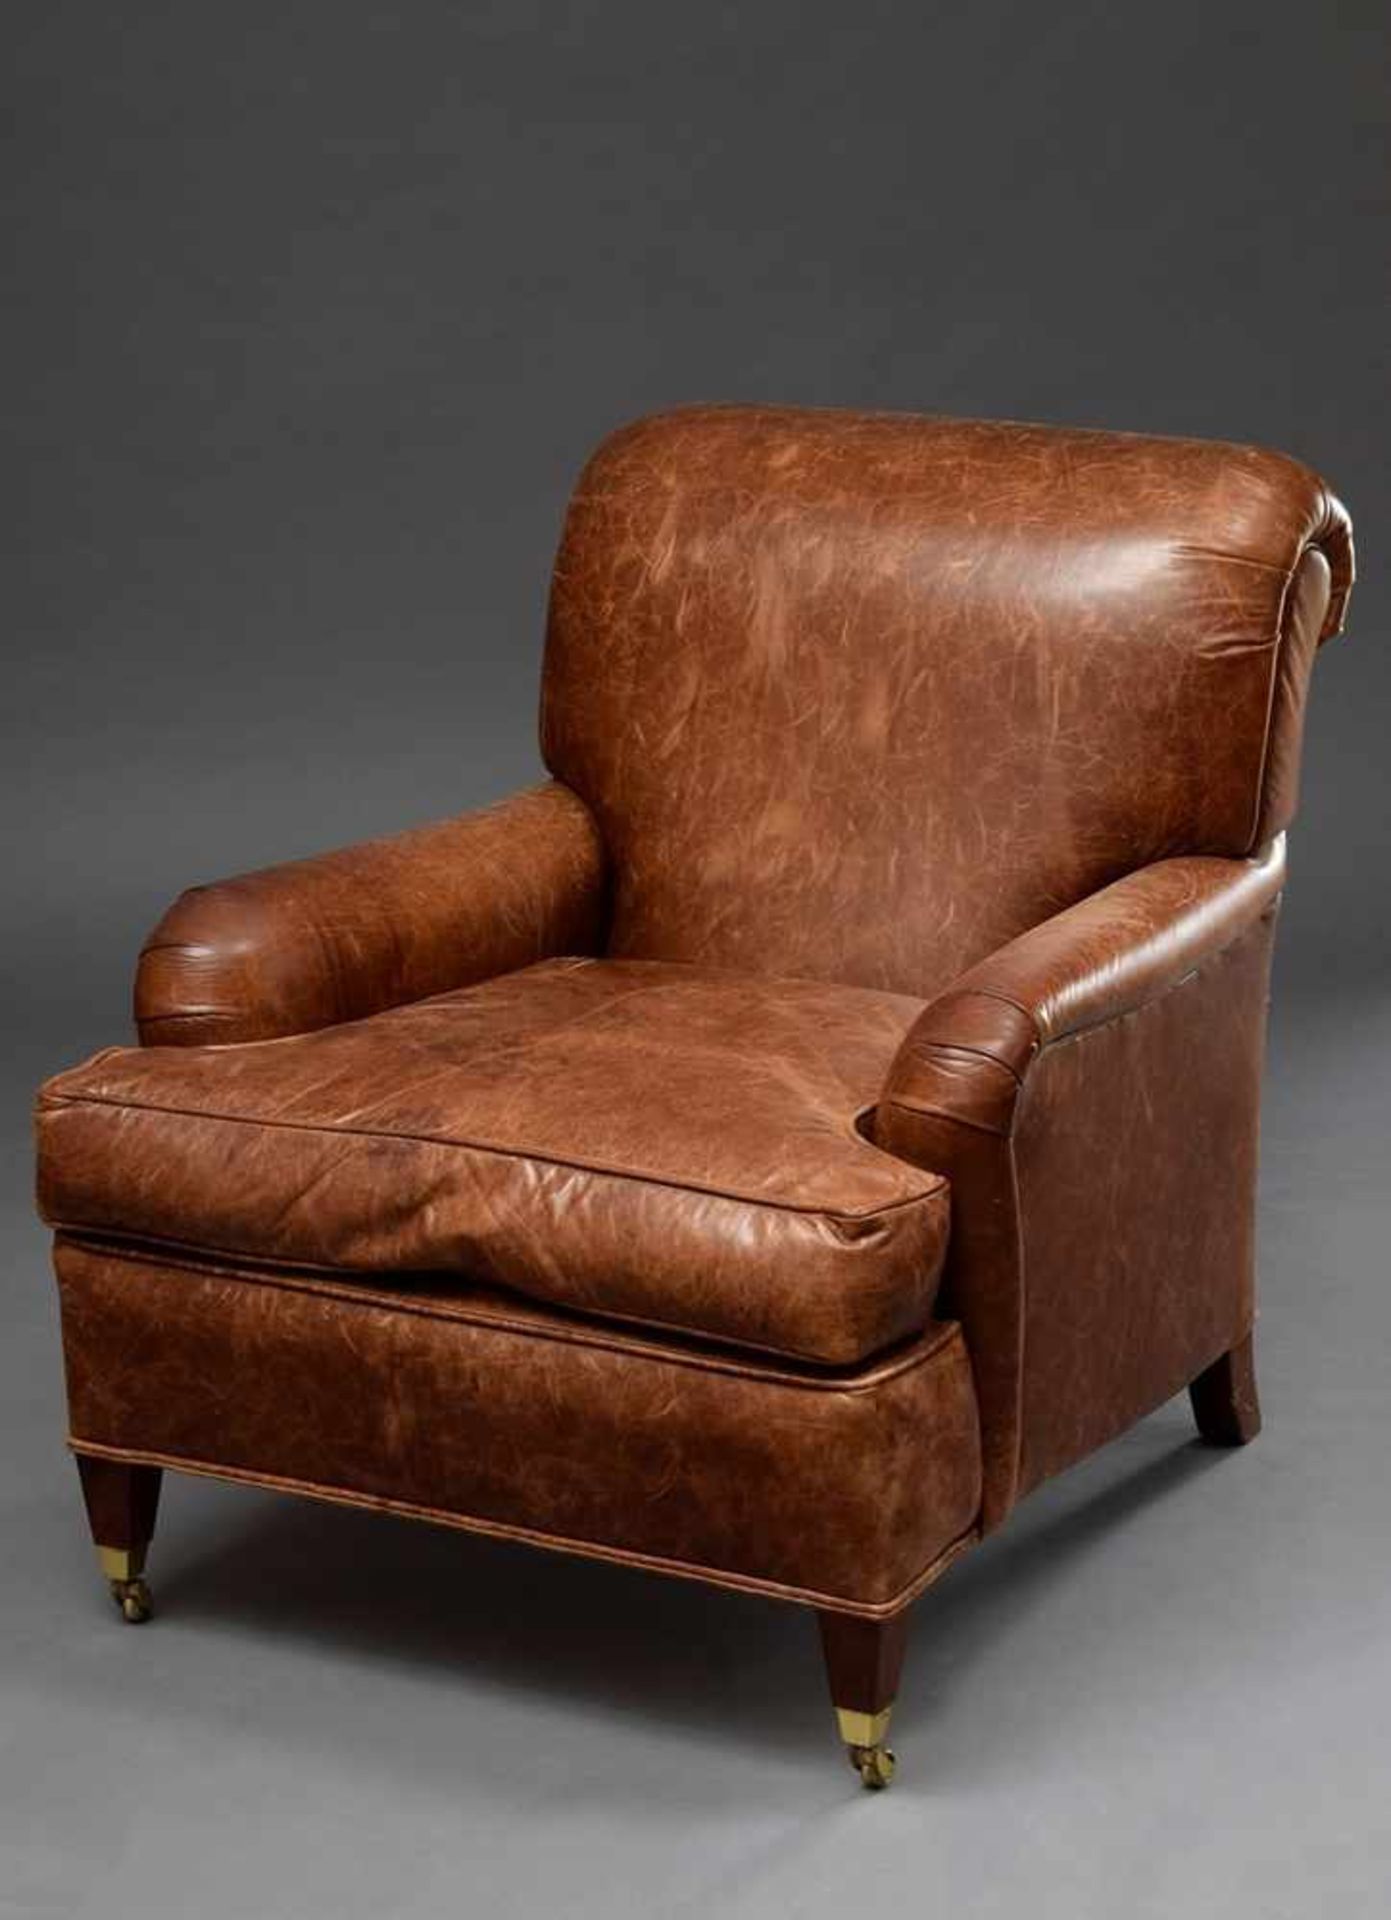 Brown leather armchair with volute handles in art deco style, h. 49/85cm, acquired by Hans Otto